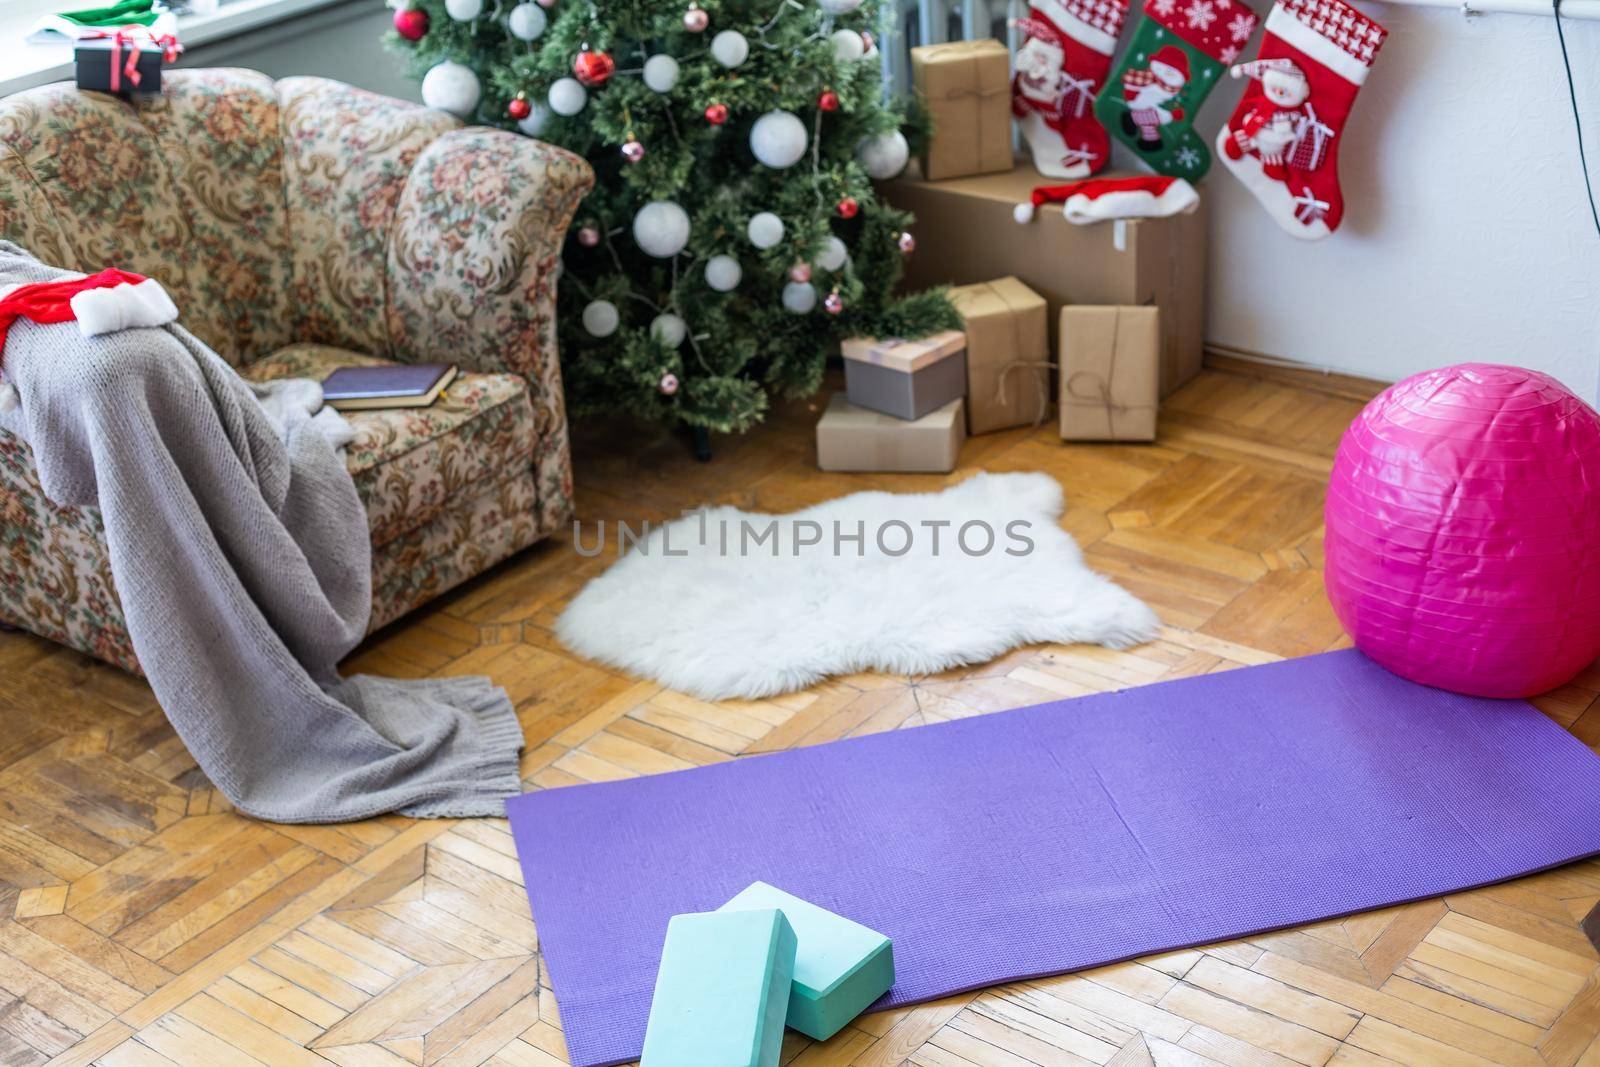 Empty space in fitness center with big windows and natural wooden floor. Unrolled yoga mat on the floor, no people. Decorated christmas tree. by Andelov13